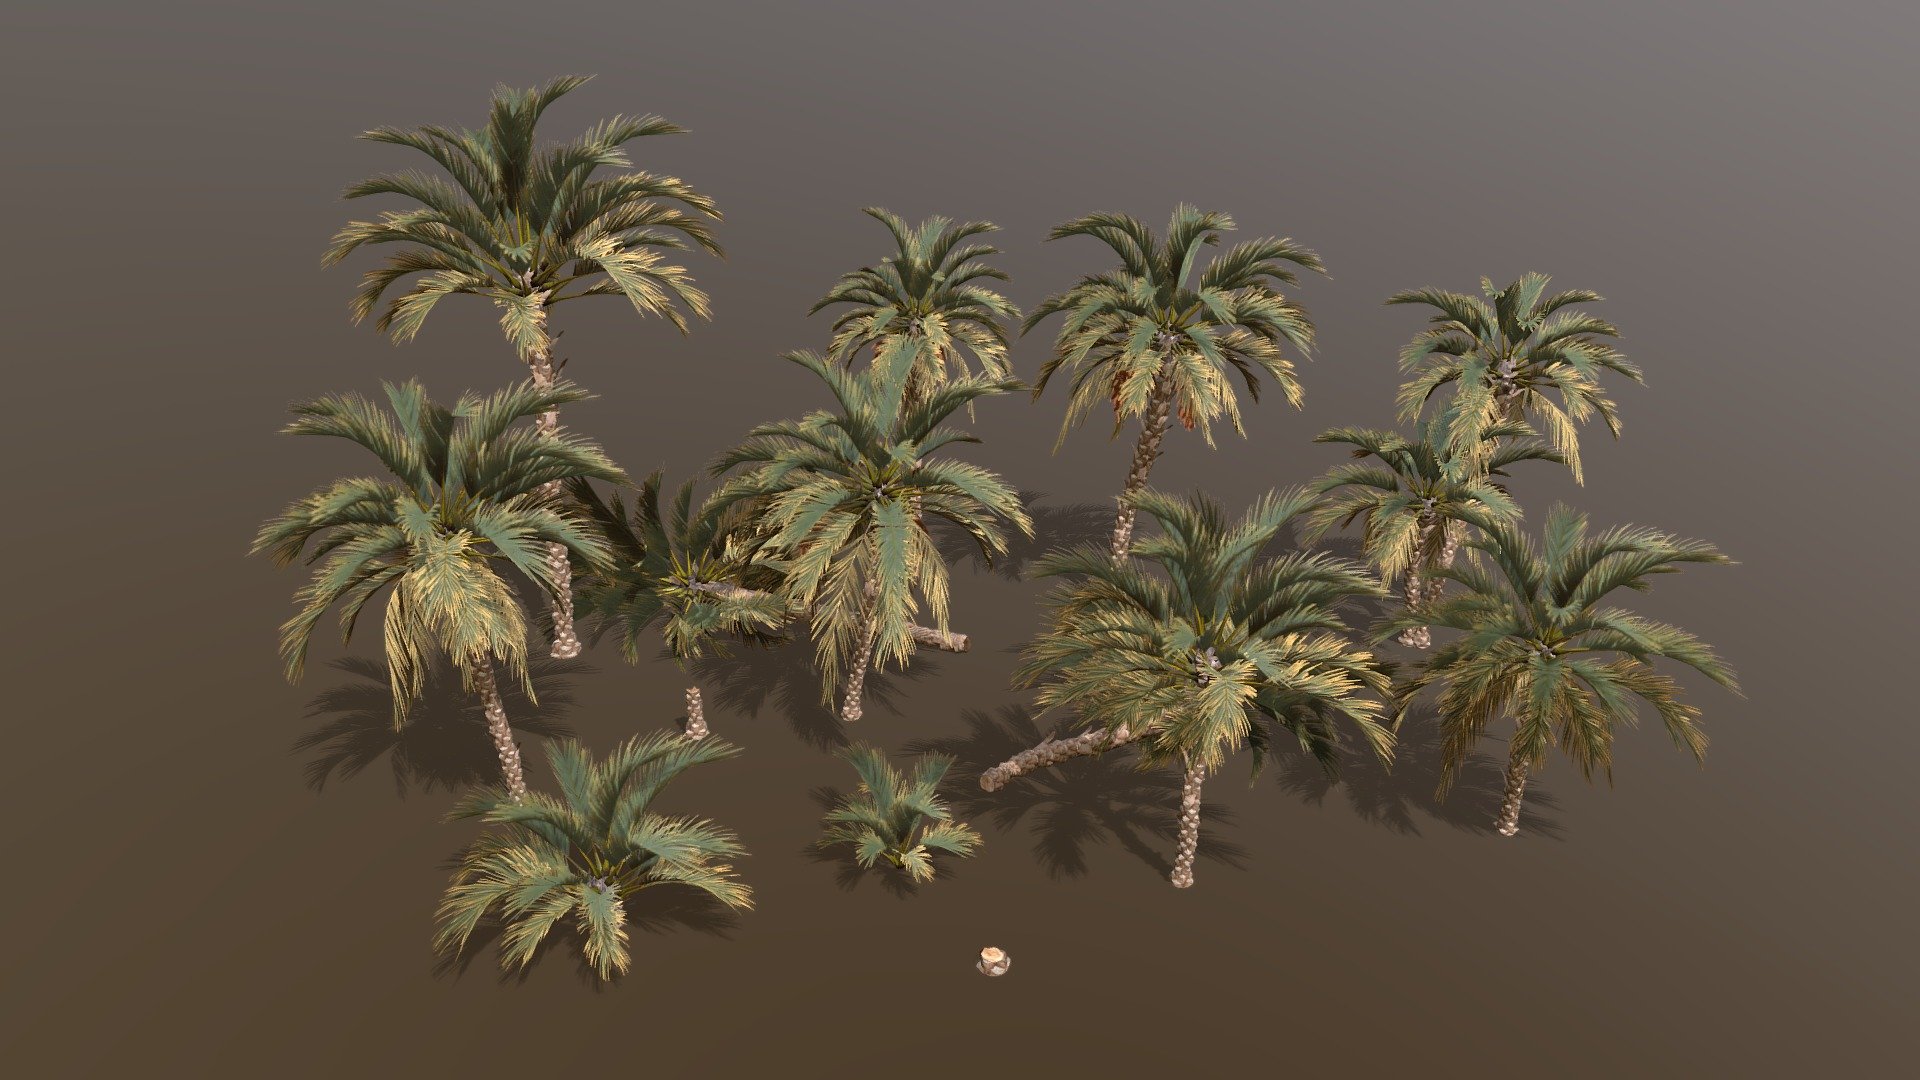 Date palm pack inspired assassin's creed origins palm models, created in tree it.

Please check out my free models on my sketchfab profile made in tree it for compatibility.

Includes 14 diffrent models.

Each modle has the main model +  5 levels of detail, last LOD is an 8 poly imposter/billboard.

Exported to .fbx .obj .dbo 

FBX format includes vertex colors for vertex shader wind animation.

Includes the tree it .tre project.

Texture size is 2k x 3.

Why am I selling this model?. Im the createor of treeit, a free tree generator that these tree models are created in. Having tree packs for sale will incentivise and insure further development of the program that is in need of improvement 3d model